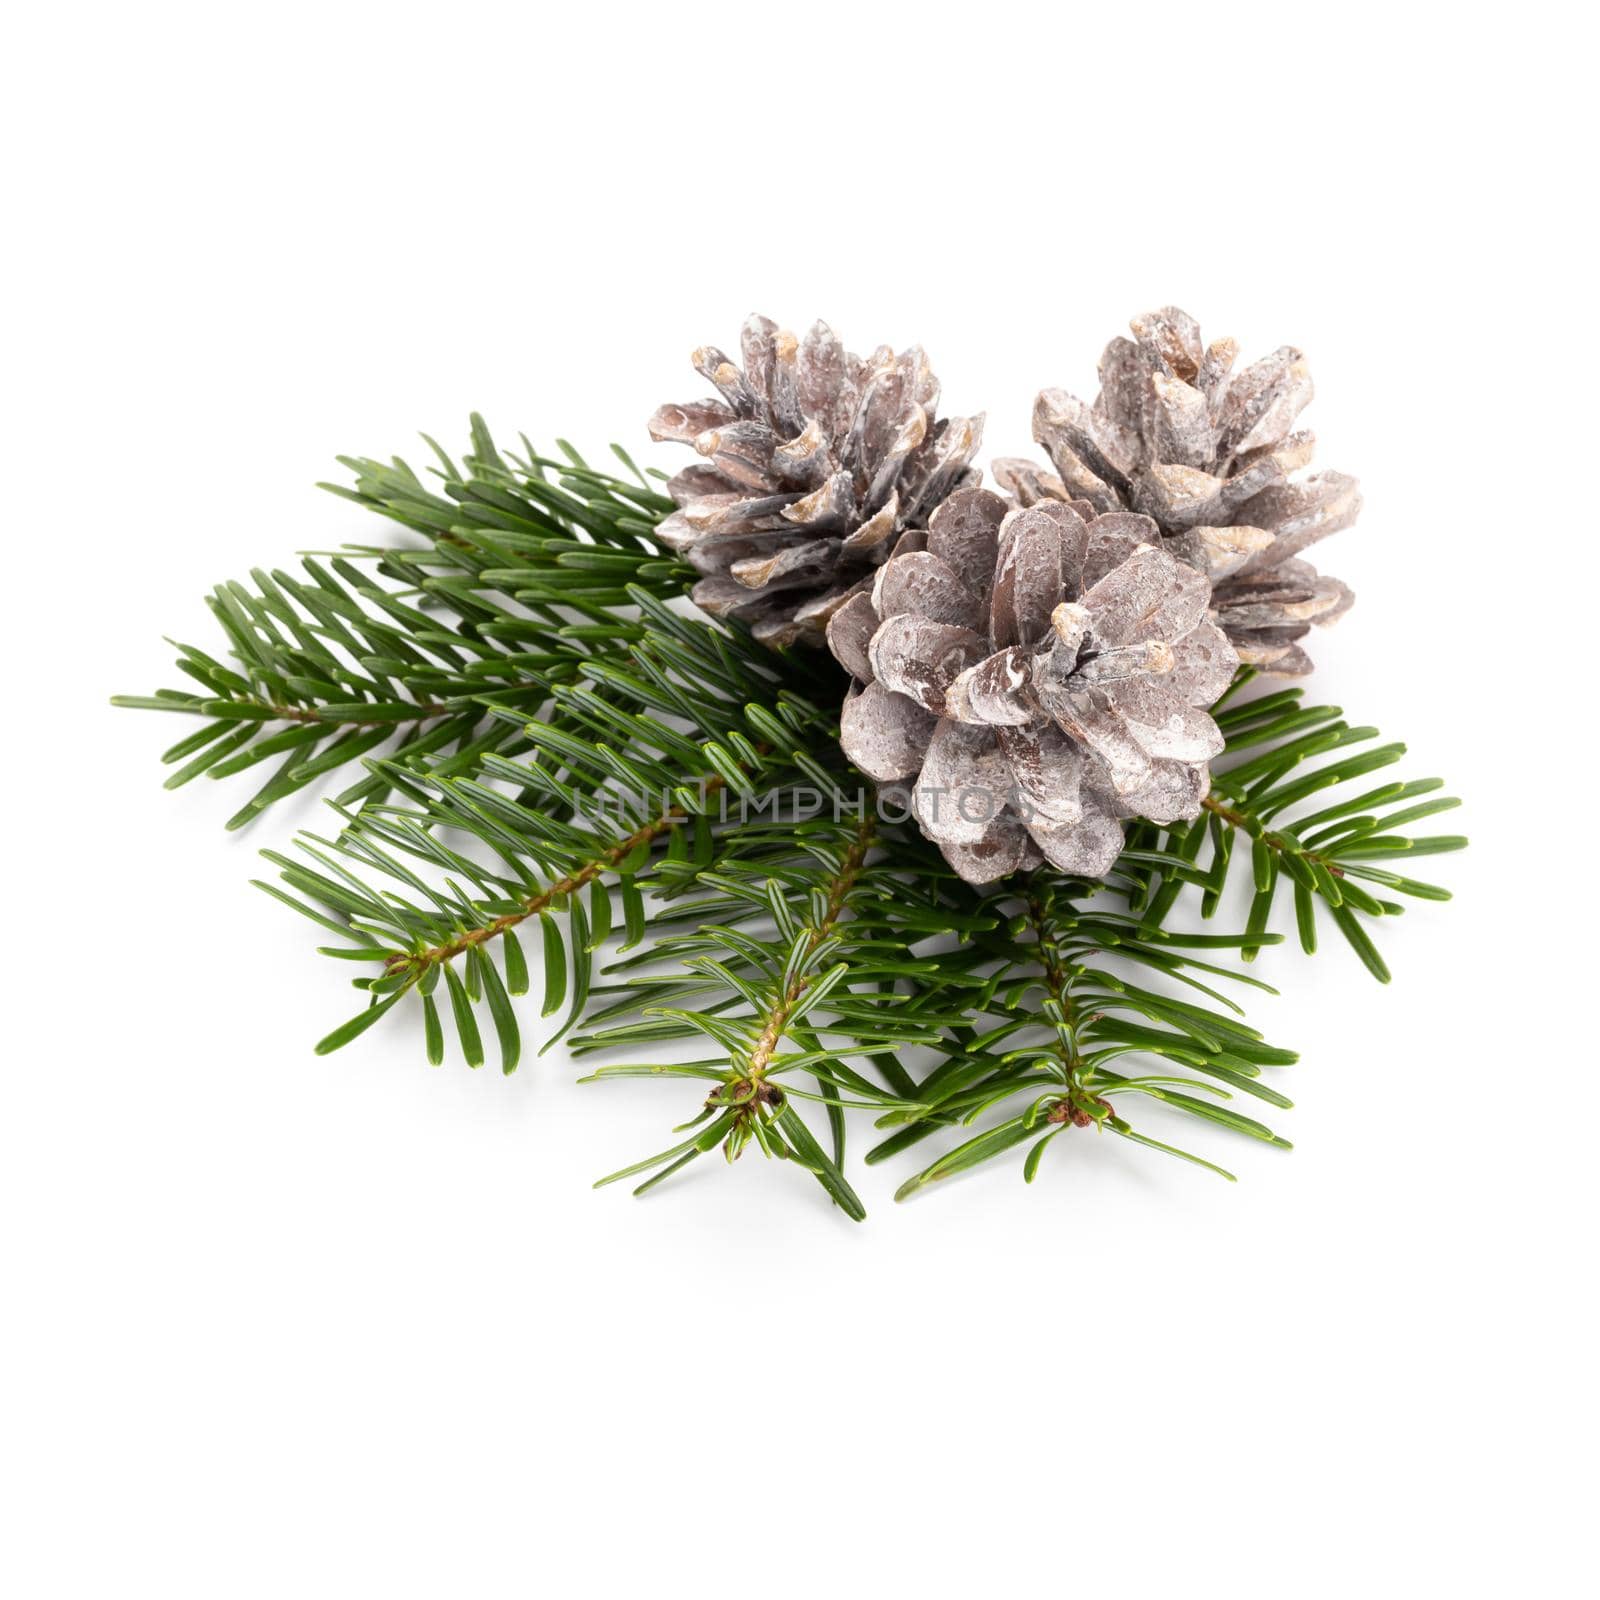 Pine cones and fir tree branch on a white background.